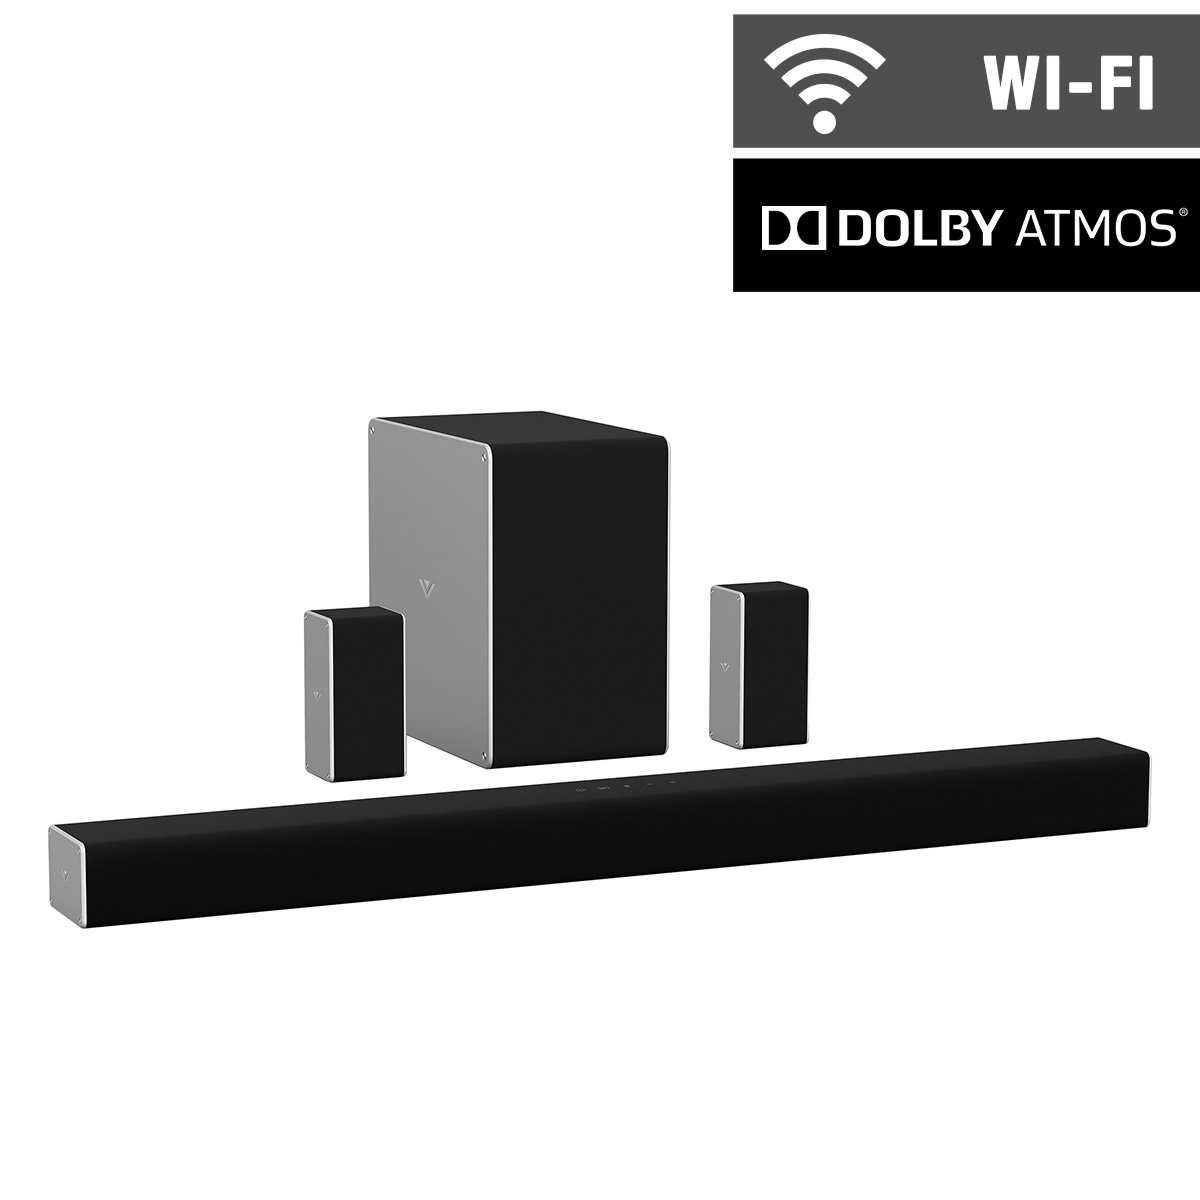 VIZIO 36" 5.1.4 Home Theater Sound System with Dolby Atmos SB36514 